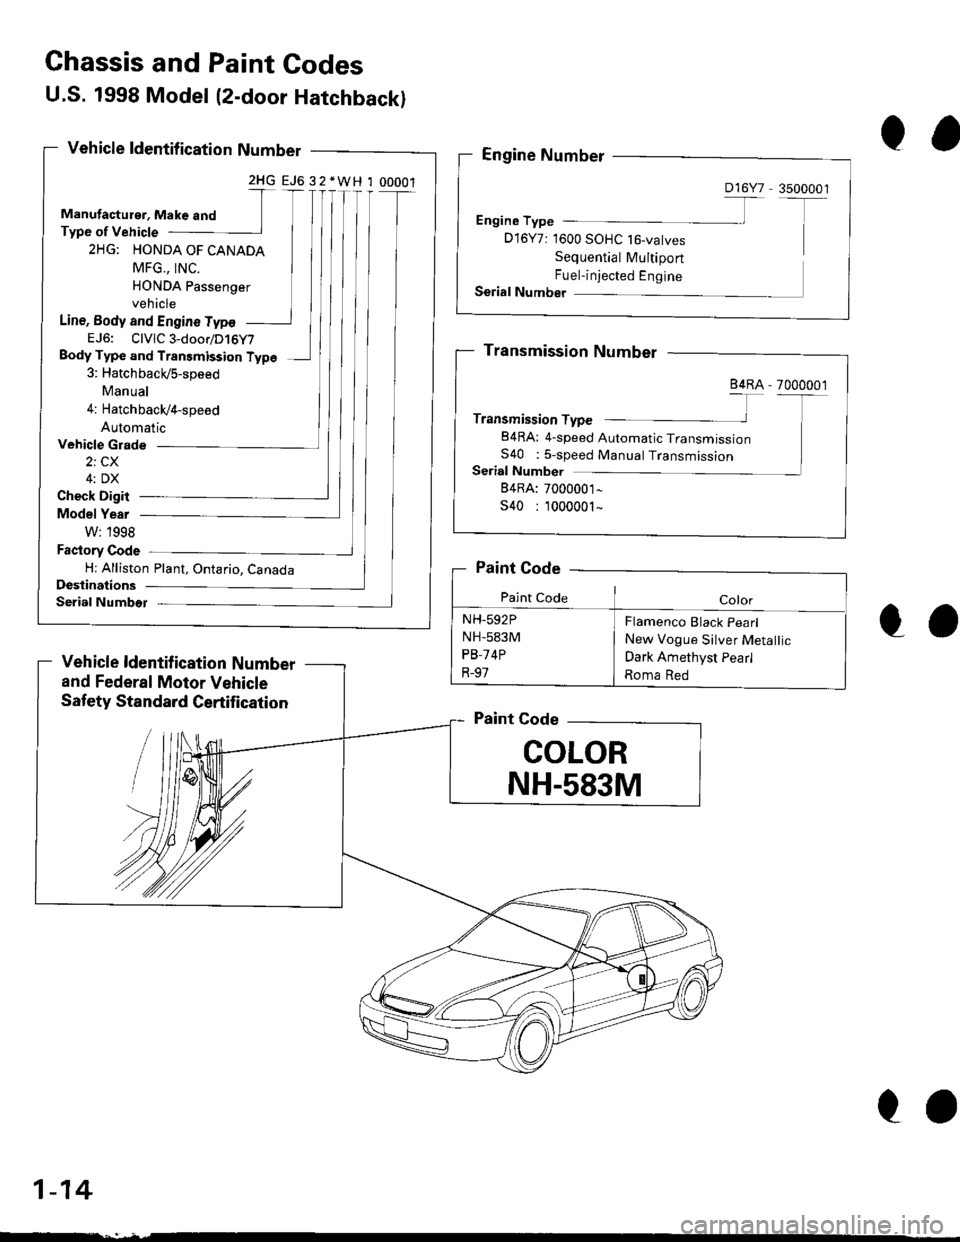 HONDA CIVIC 1997 6.G Workshop Manual Ghassis and Paint Godes
Vehicle Grade
2i CX
4: DX
Check Digit
Model Year
W: 1998
Factory Code
Hr Alliston Plant, Ontario, CanadaDeslinations
Serial Numbet
Vehicle ldentif ication Number
and Federal Mo